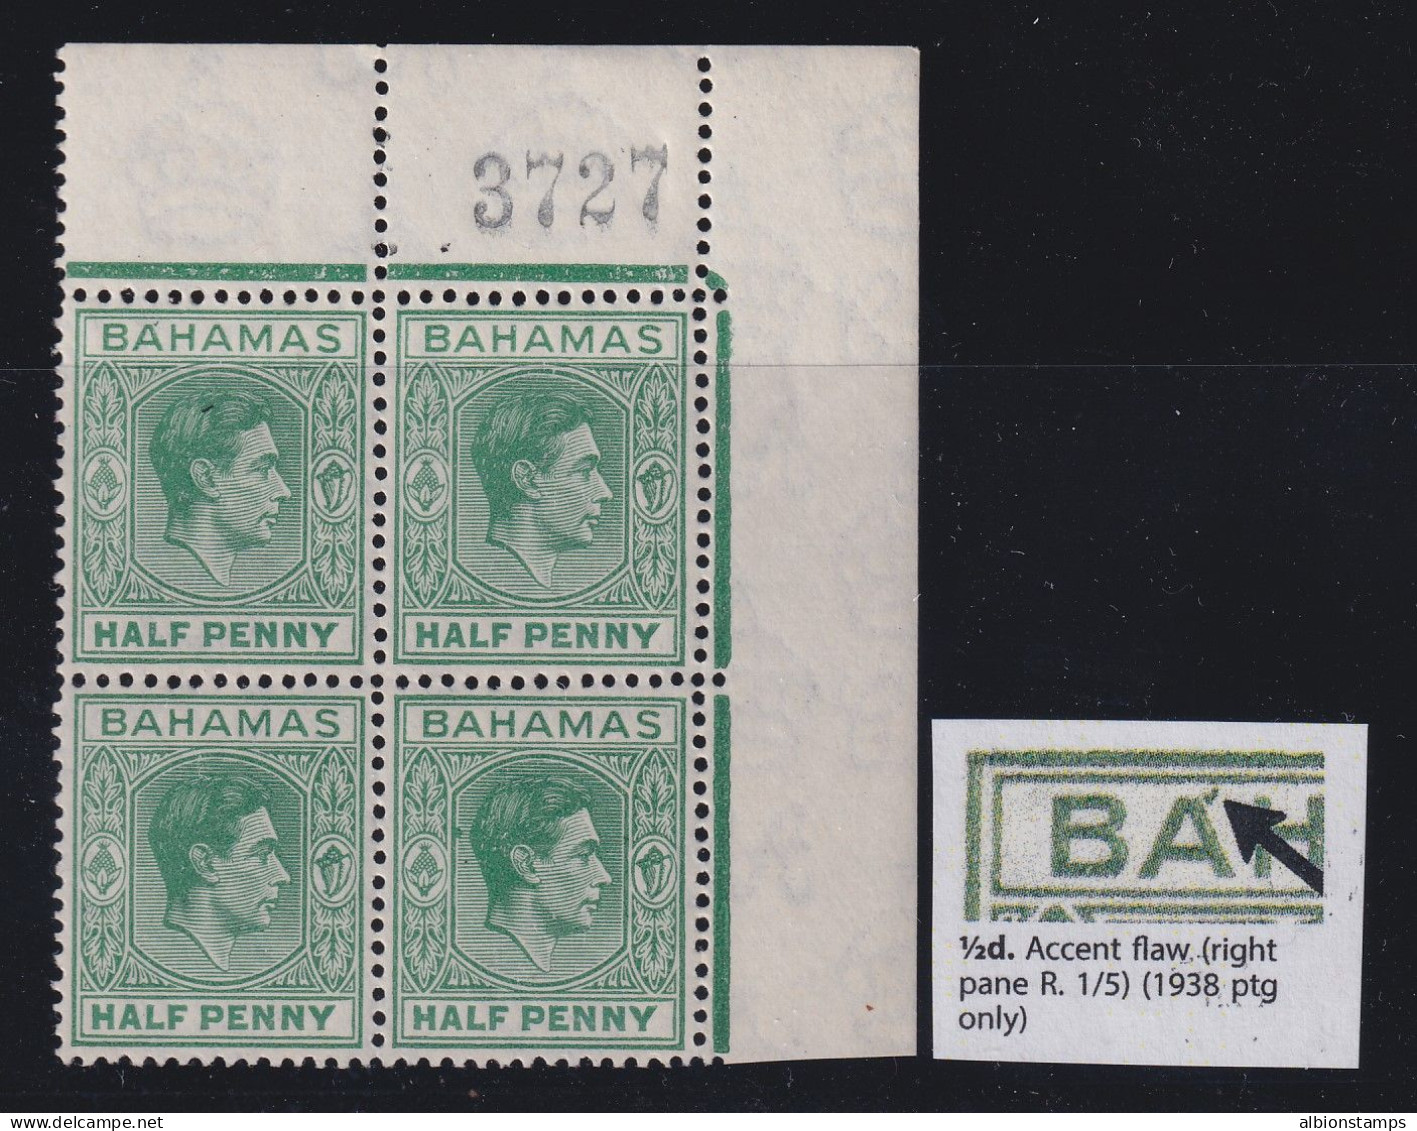 Bahamas, SG 149b, MNH Control Block "Accent Flaw" Variety - 1859-1963 Crown Colony